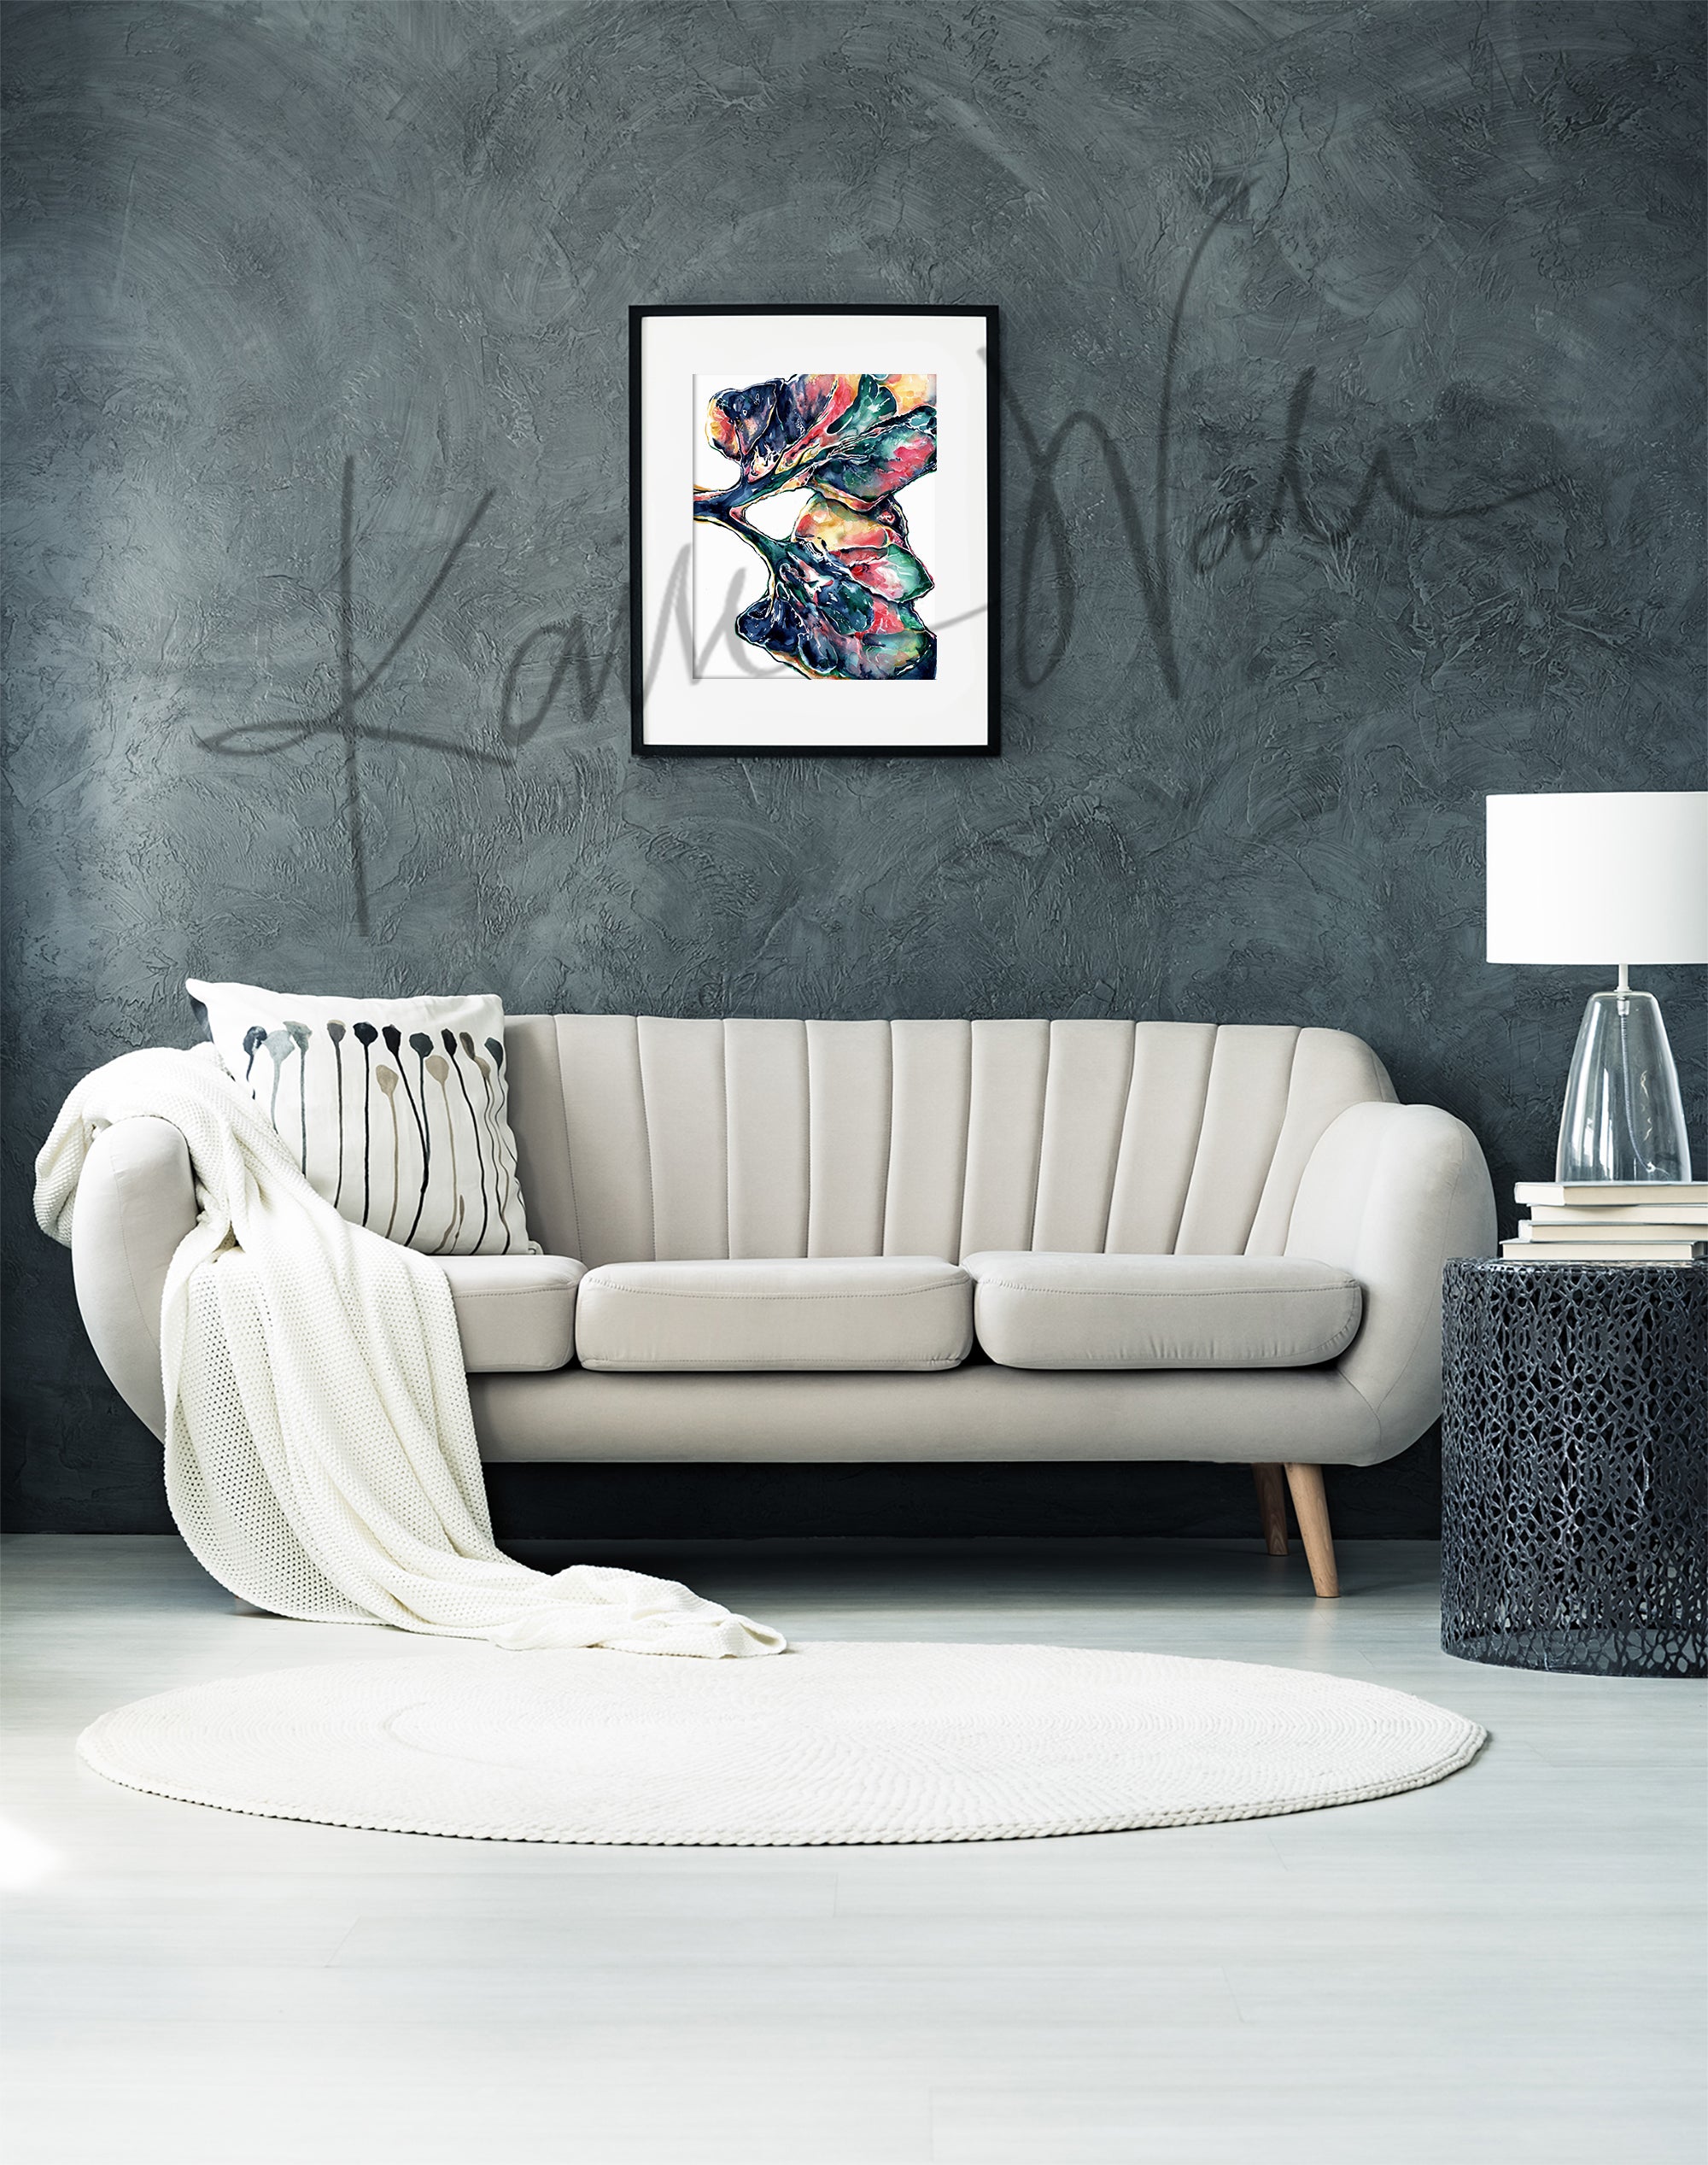 Framed colorful, abstract watercolor painting of a lung dissection in navy, green, yellow, and pink. The painting is hanging over a white couch.